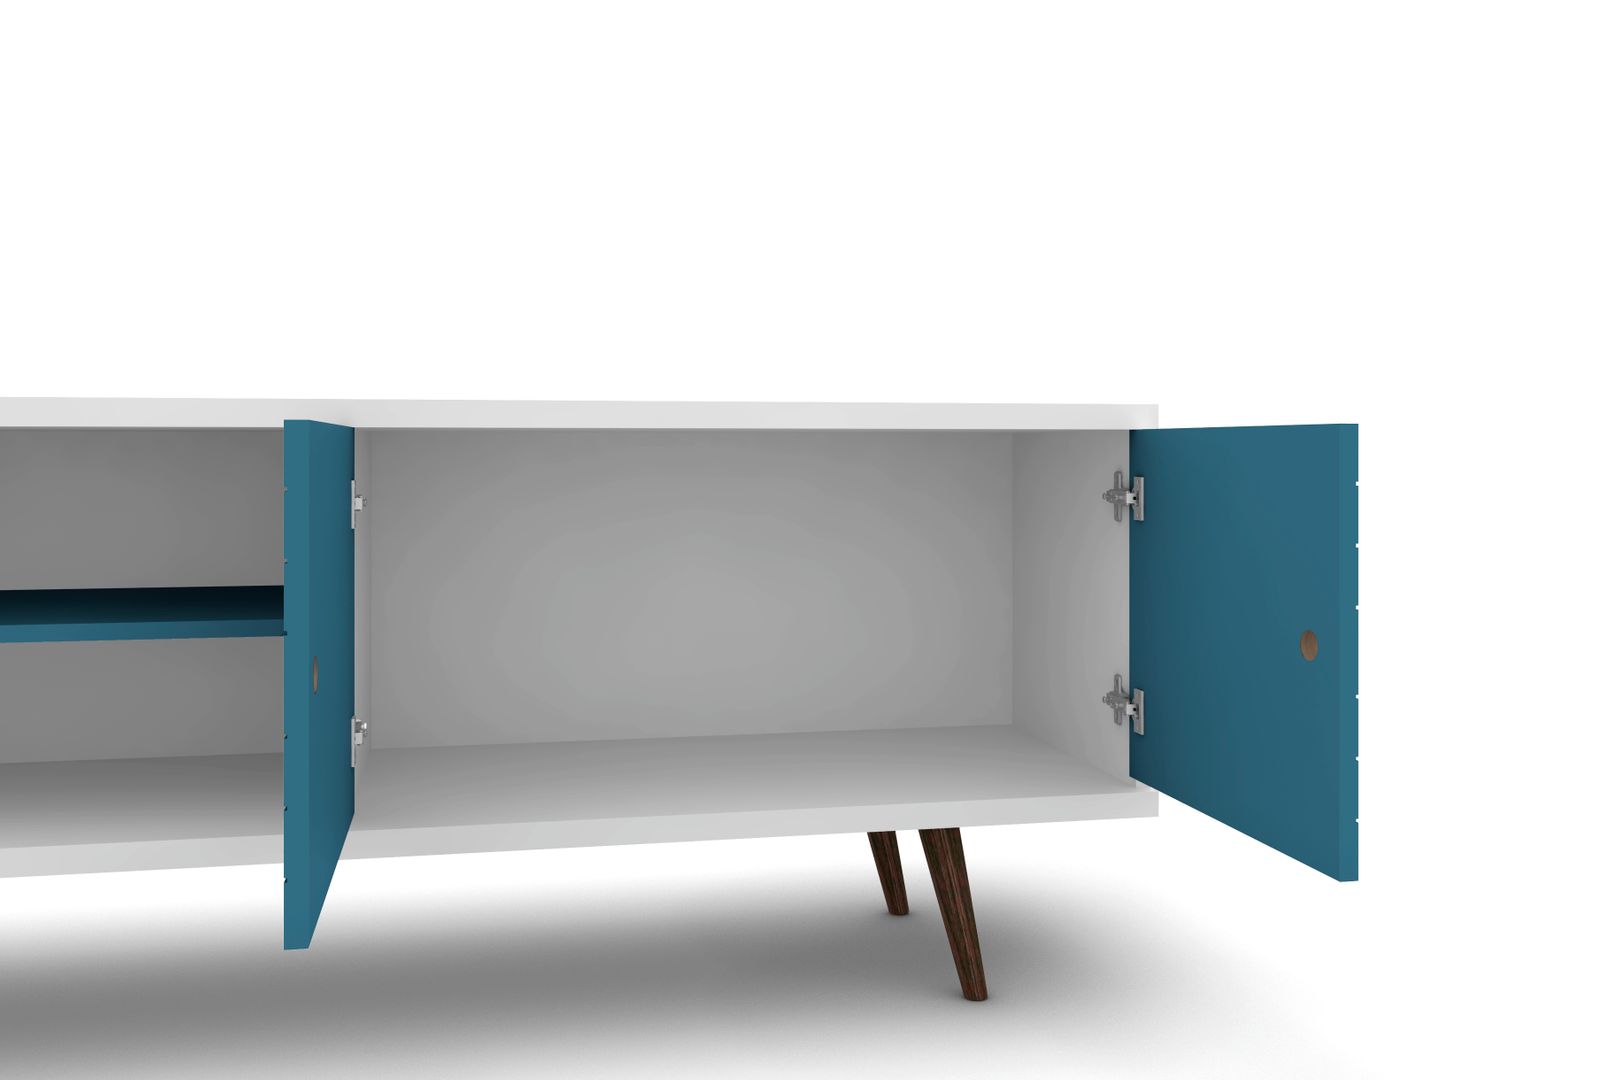 Manhattan Comfort Liberty 62.99 Mid-Century Modern TV Stand and Panel with Solid Wood Legs in White and Aqua Blue